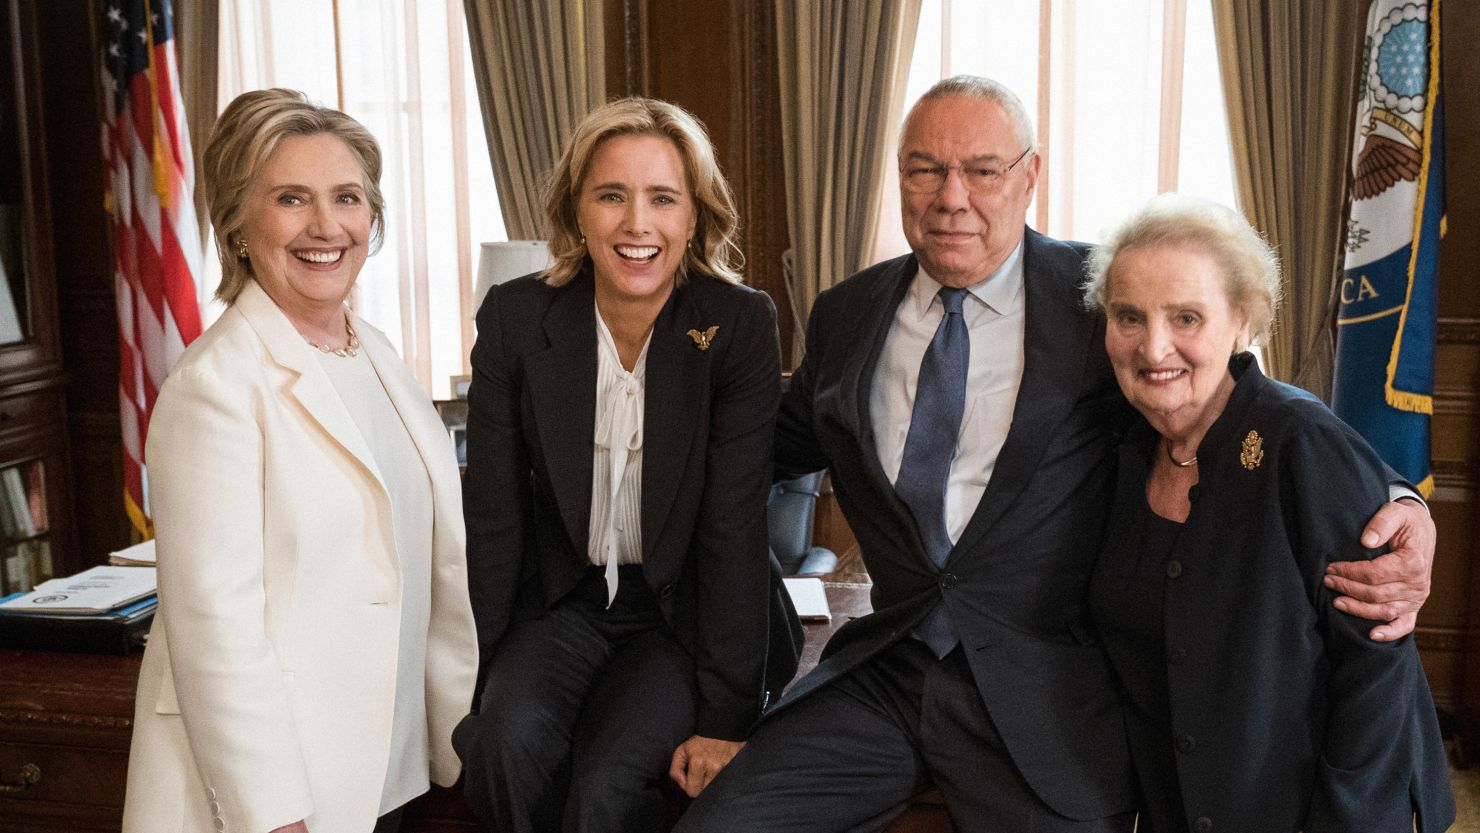 Former Secretaries of State Hillary Clinton, Colin Powell and Madeleine Albright joined Téa Leoni on the set of "Madam Secretary."